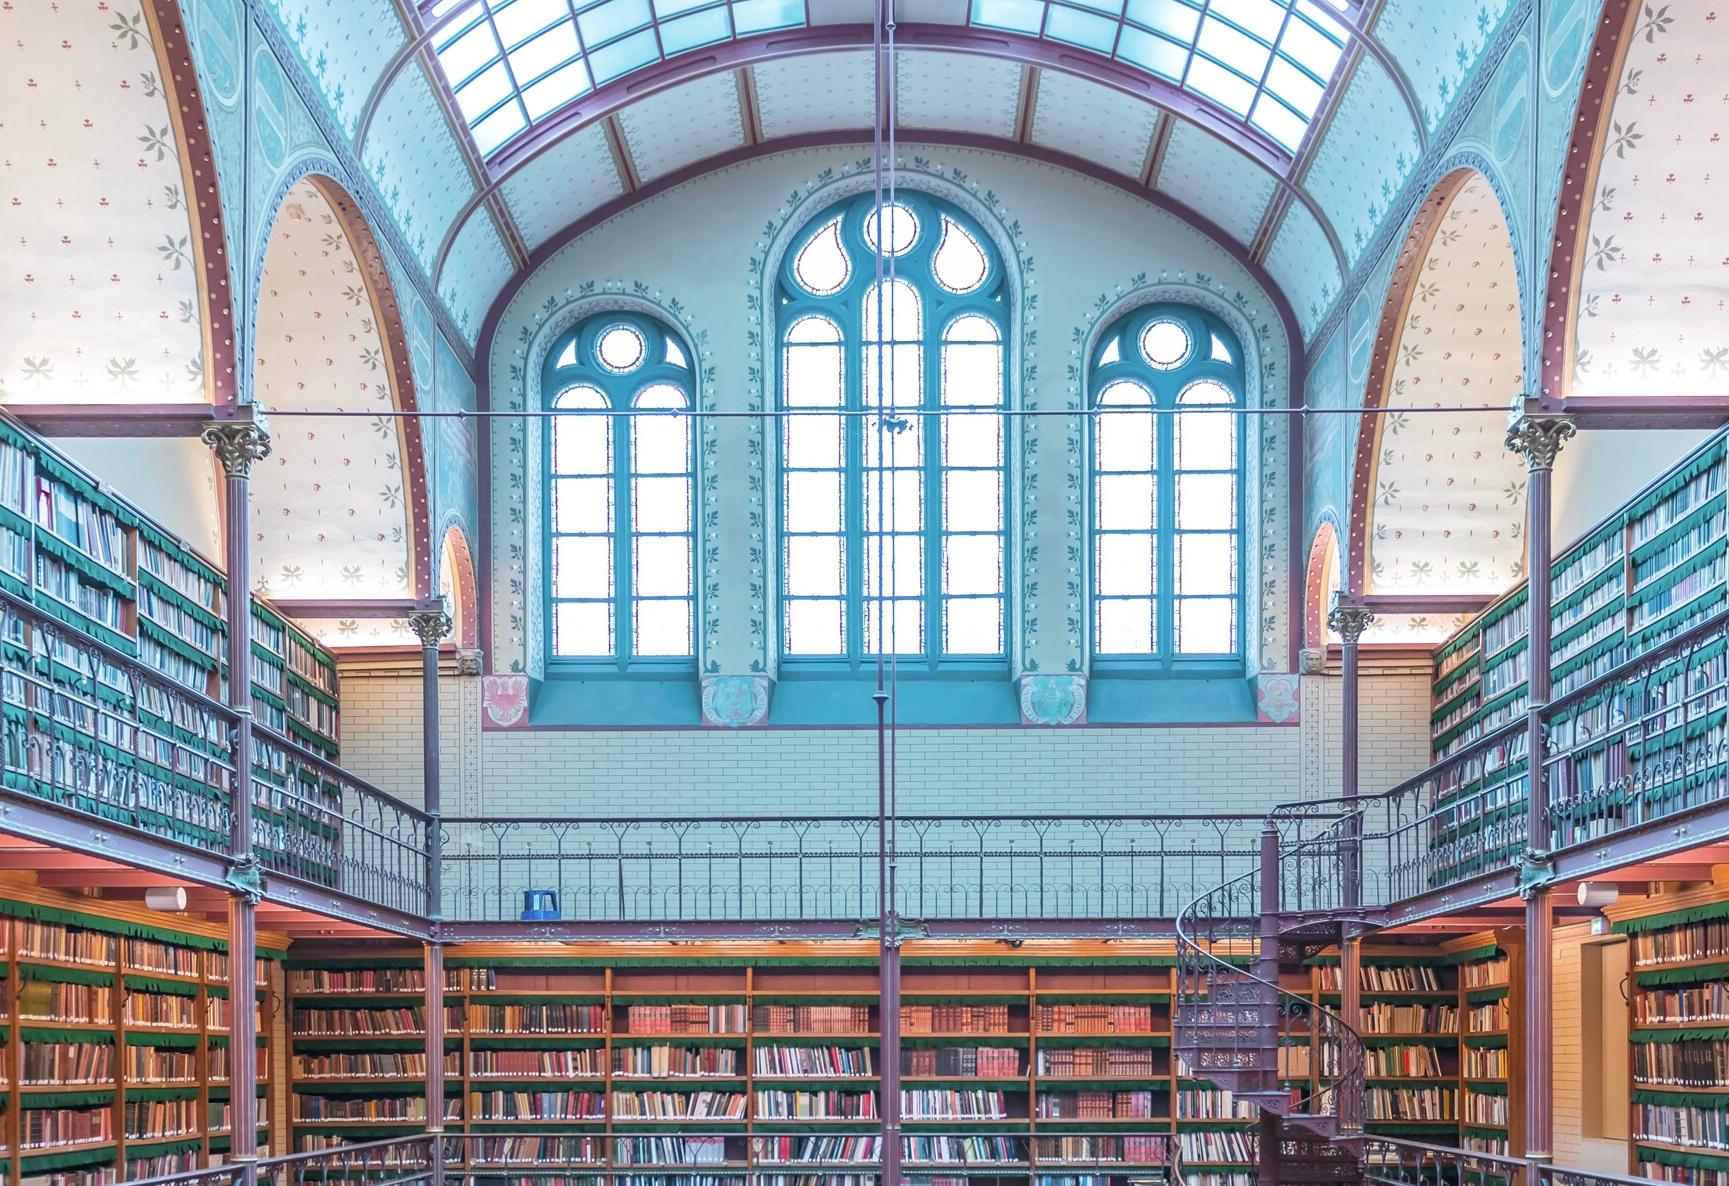 Rijks Museum Library - color photography - Photograph by Richard Silver